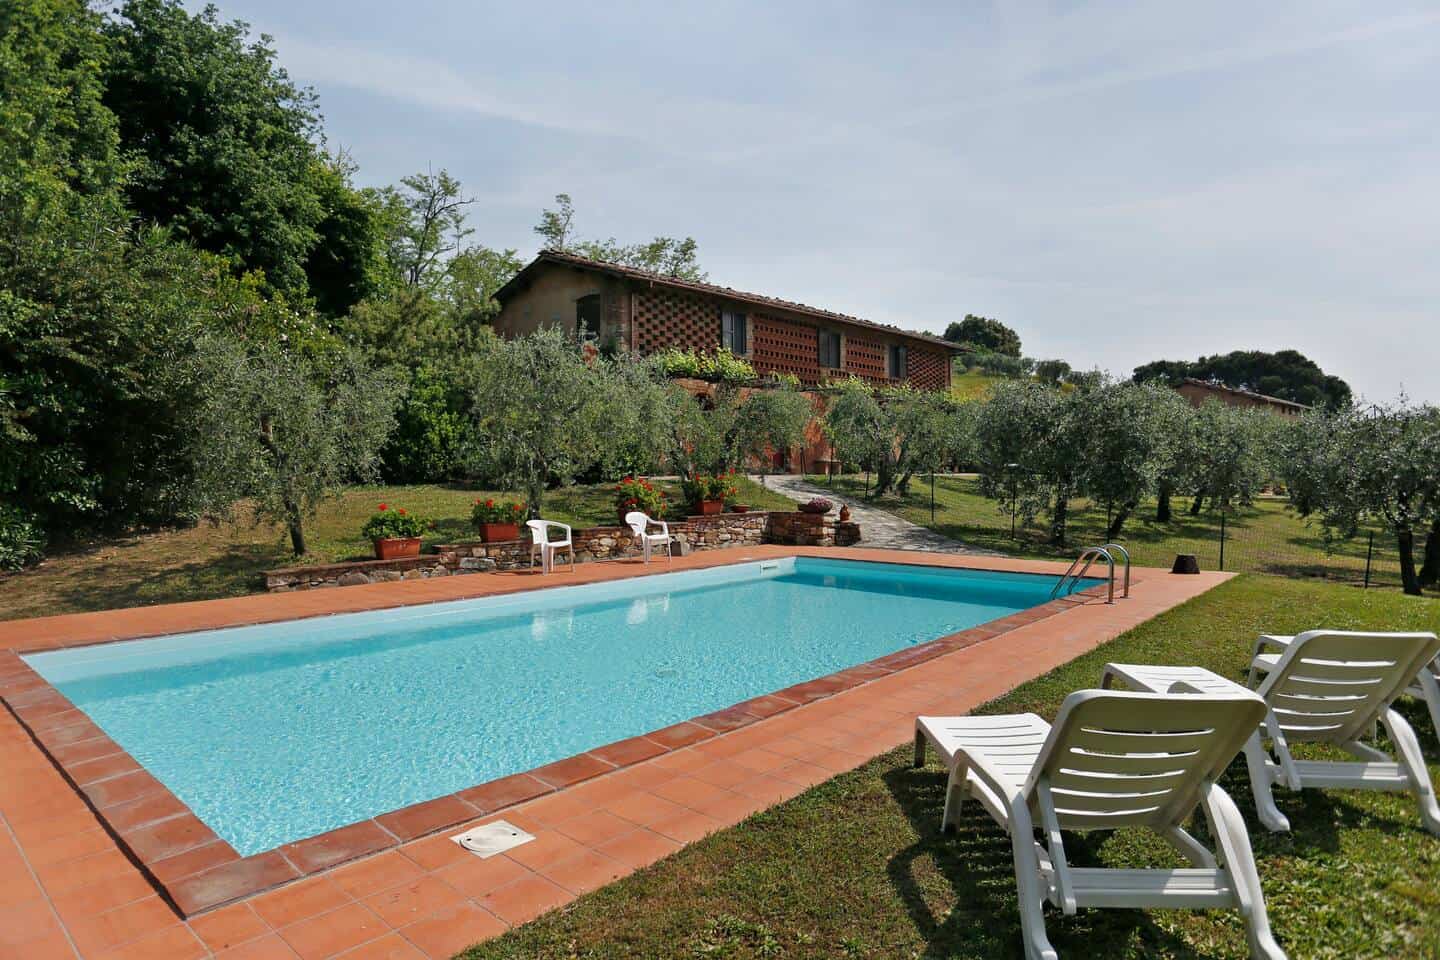 Image of Airbnb rental in Lucca, Italy